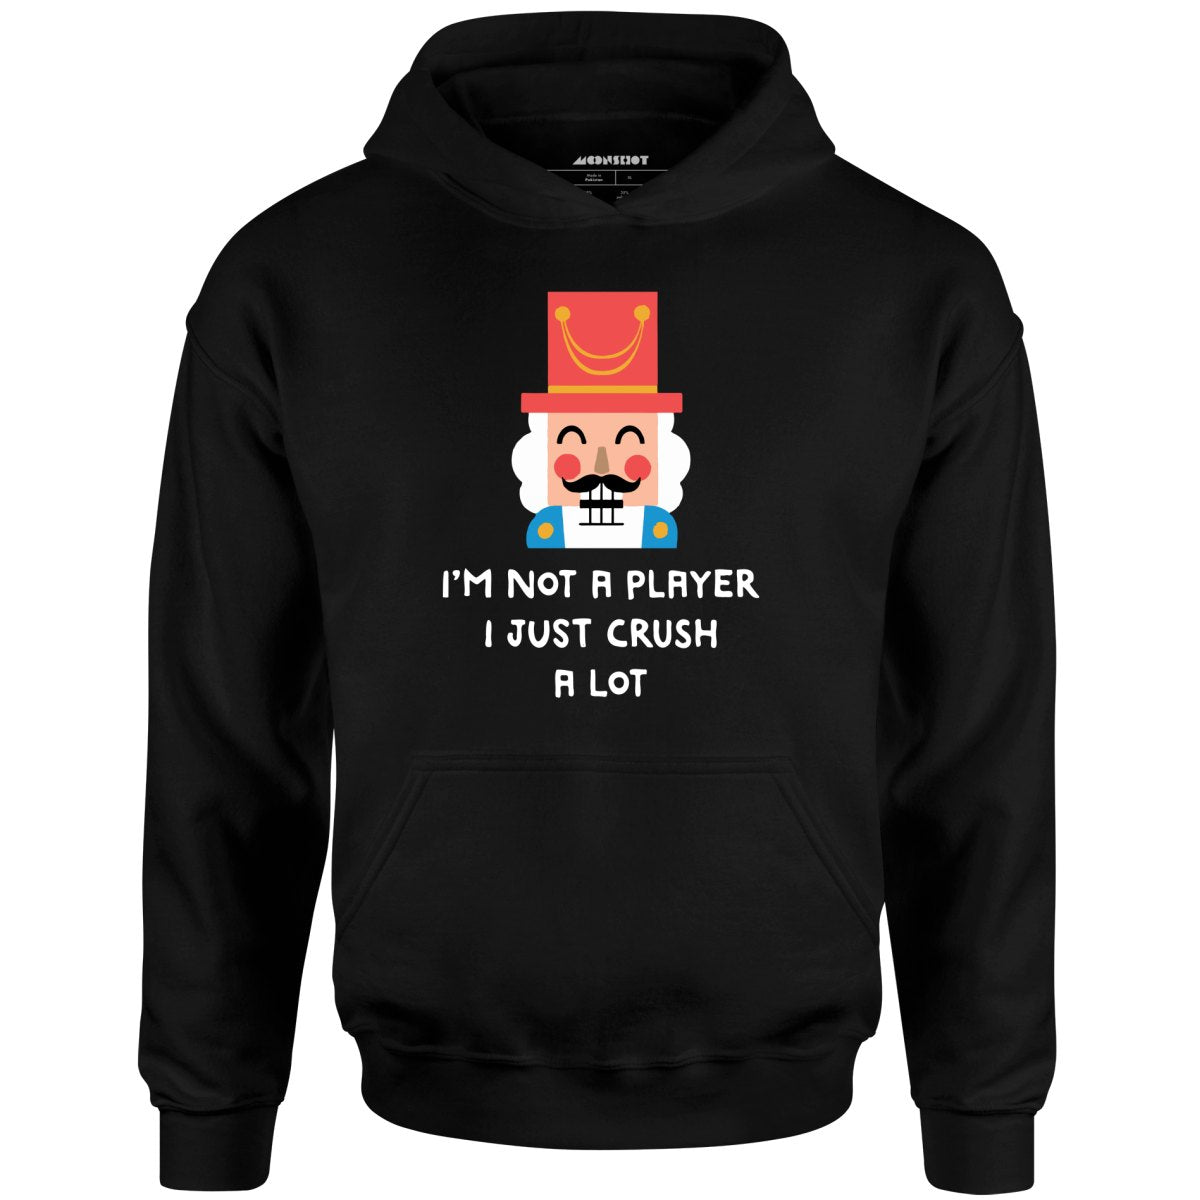 I'm Not a Player I Just Crush A Lot - Unisex Hoodie